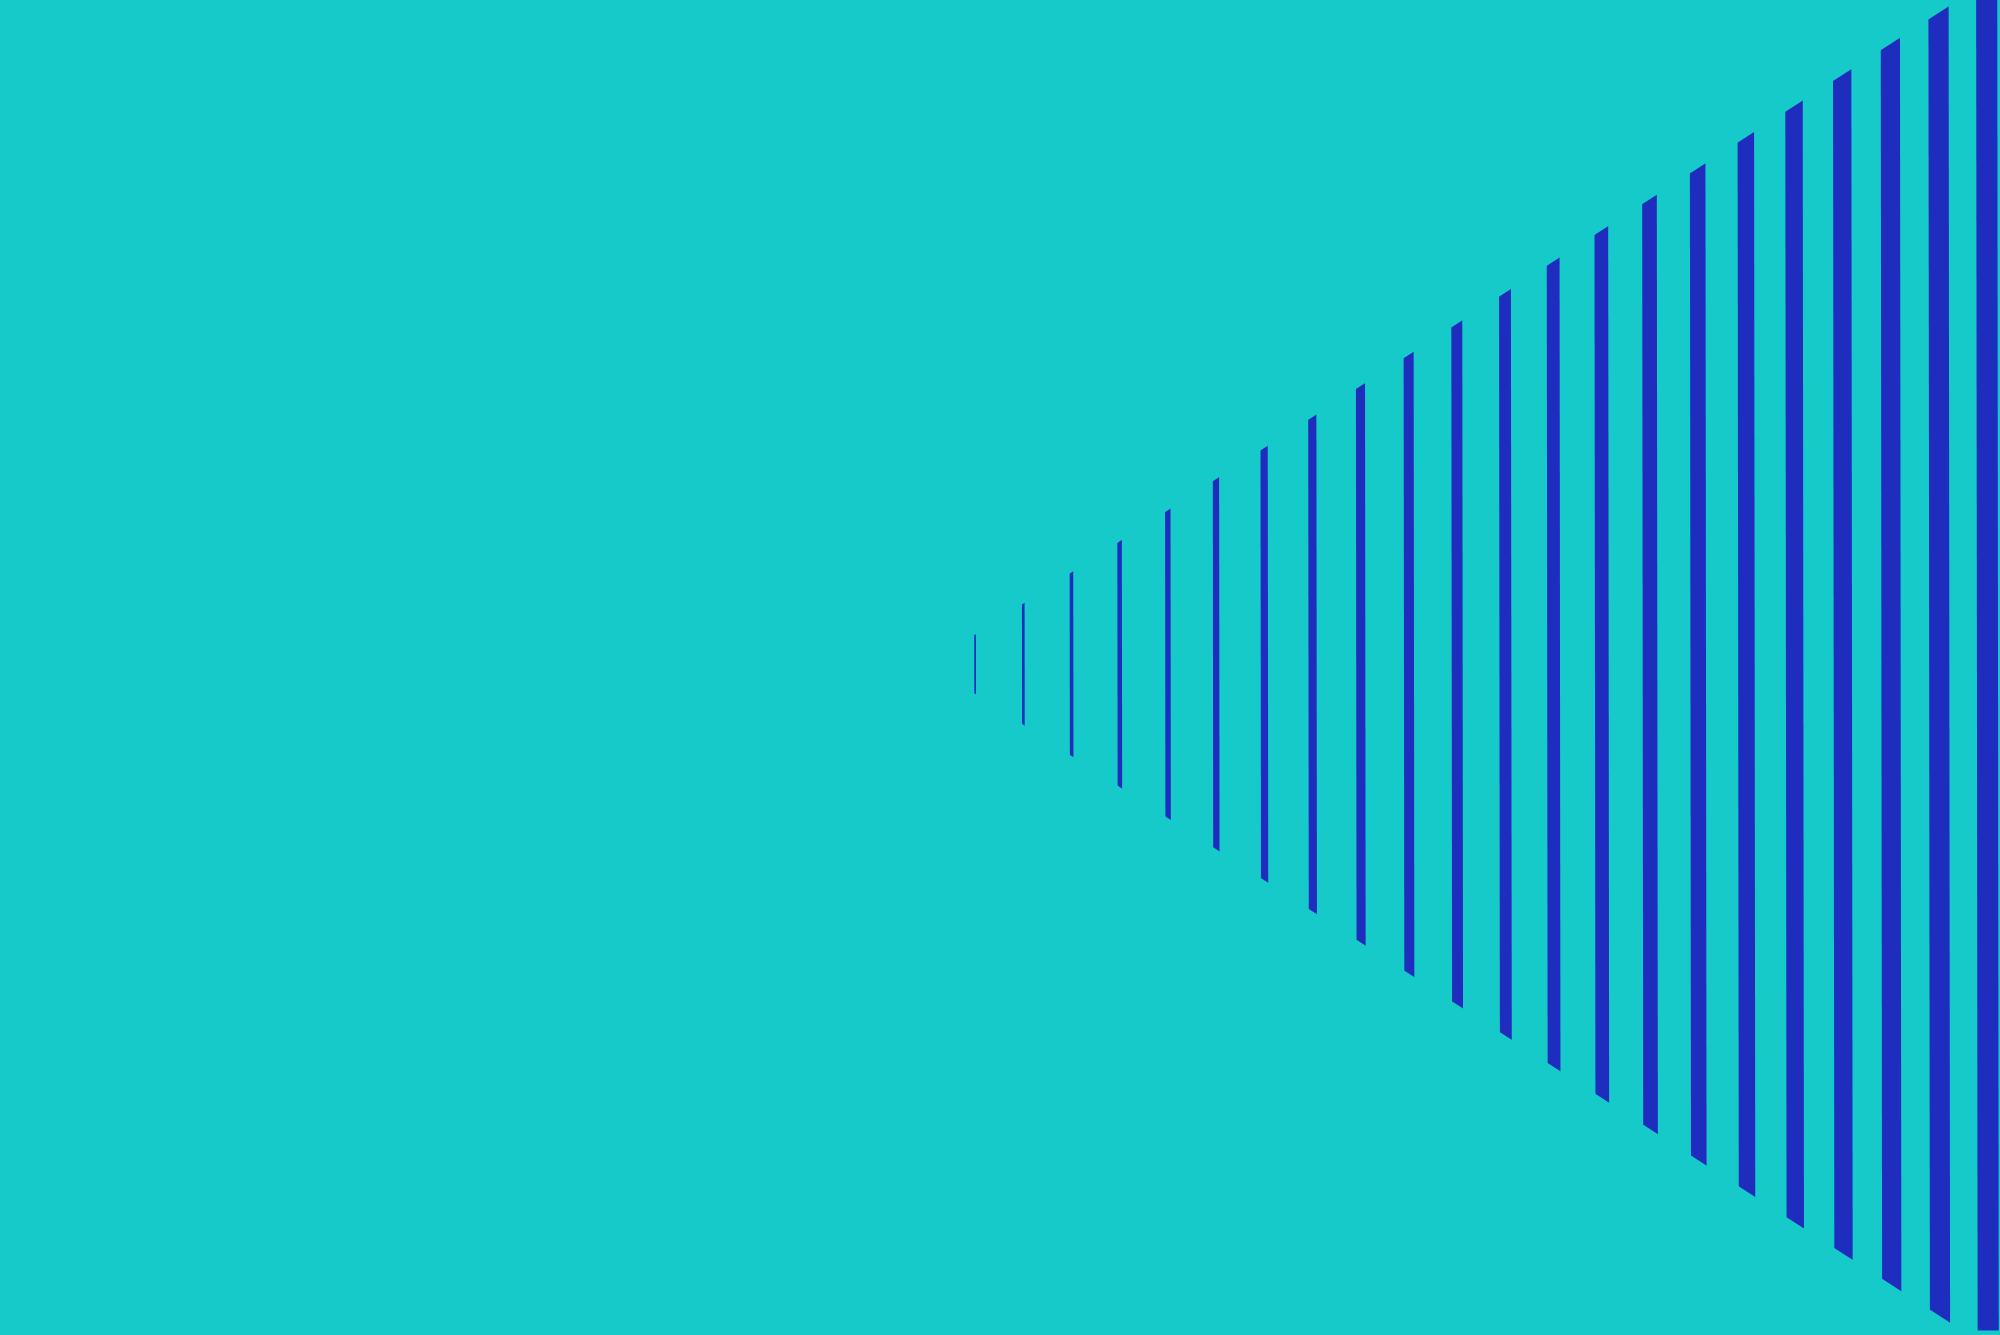 Turquoise rectangle with vertical blue lines forming triangle